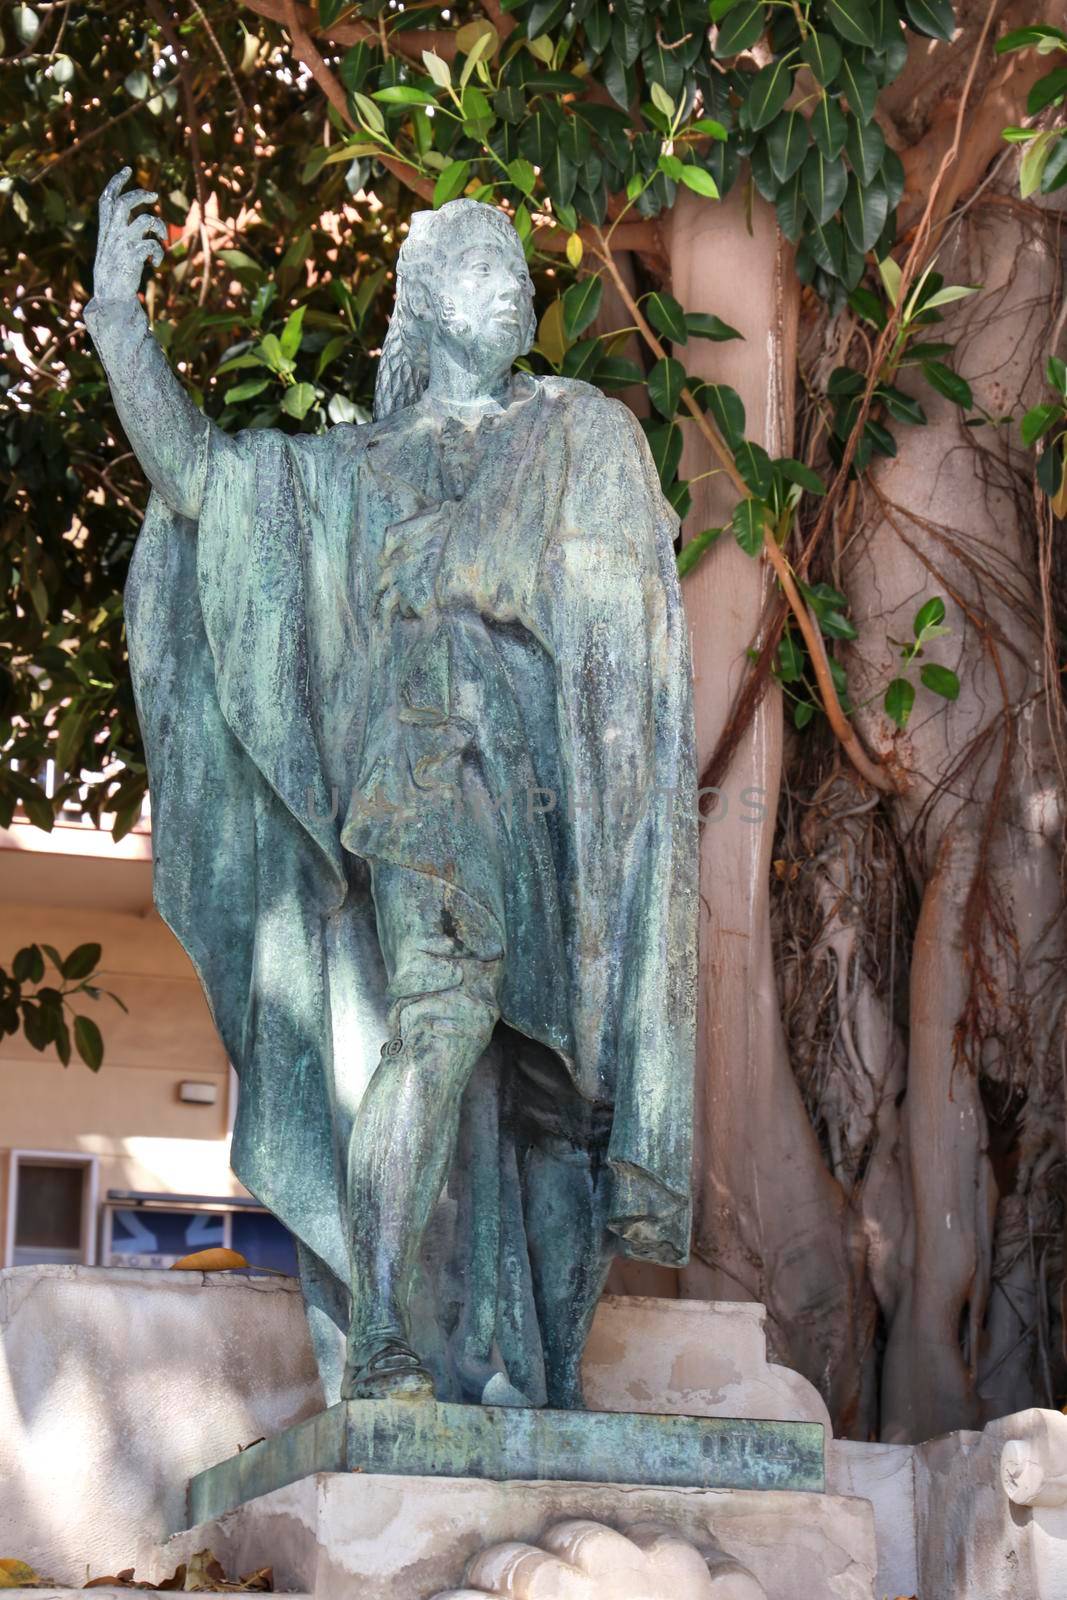 Isidoro Maiquez statue at San Francisco Square in Cartagena by soniabonet